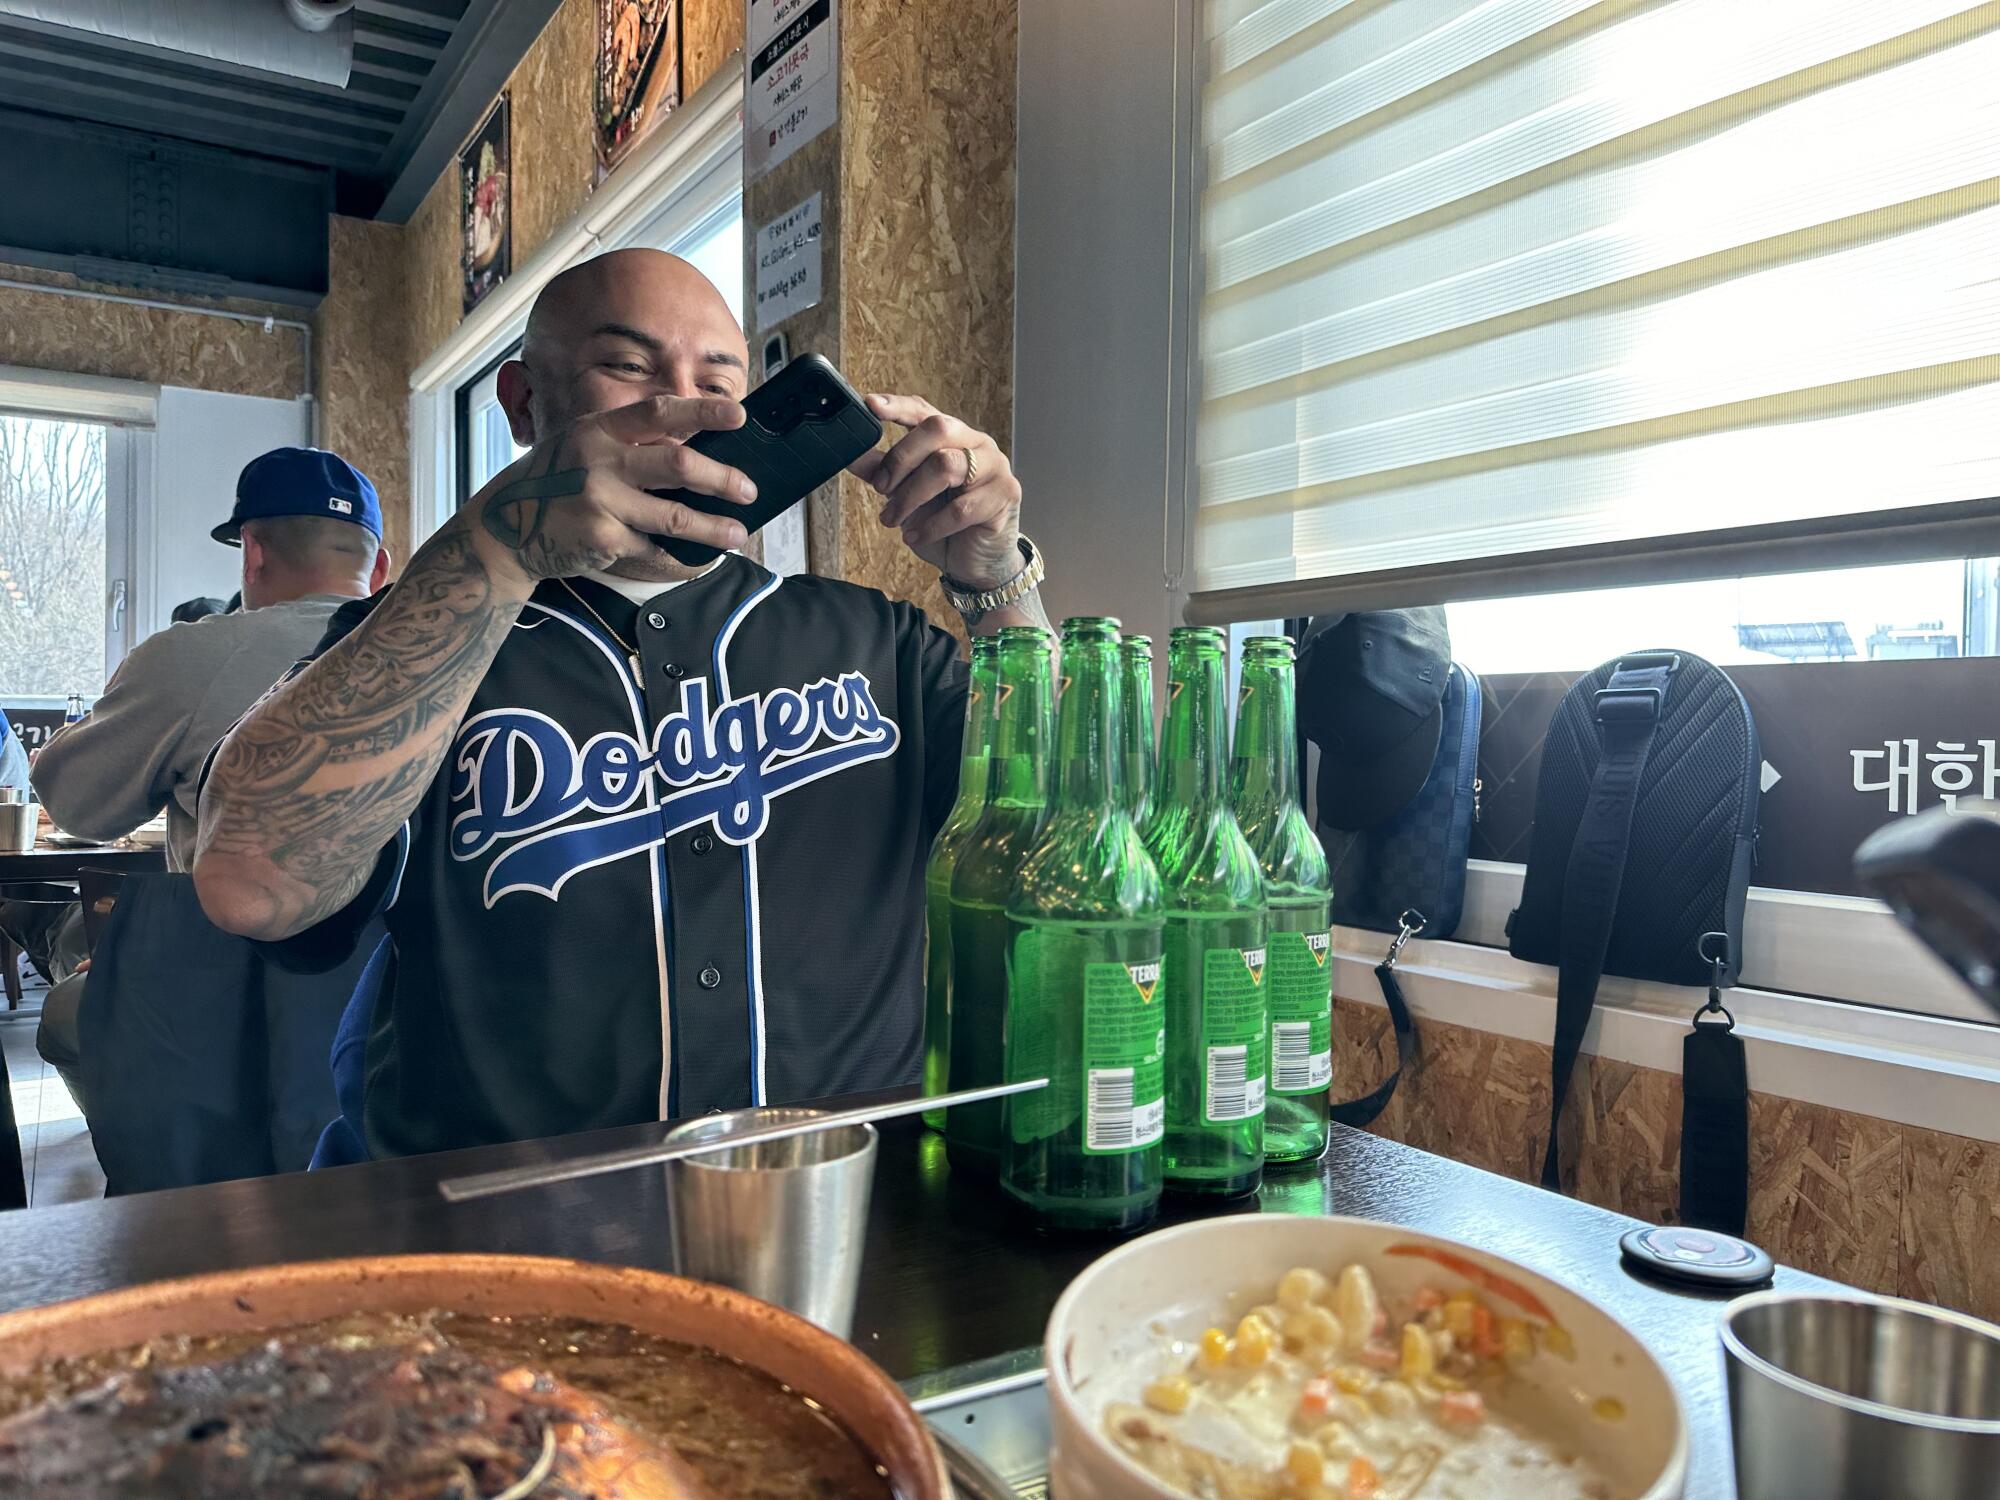 After lunch in the demilitarized zone, a Dodgers fan takes a photo of the beer he and a friend drank. 